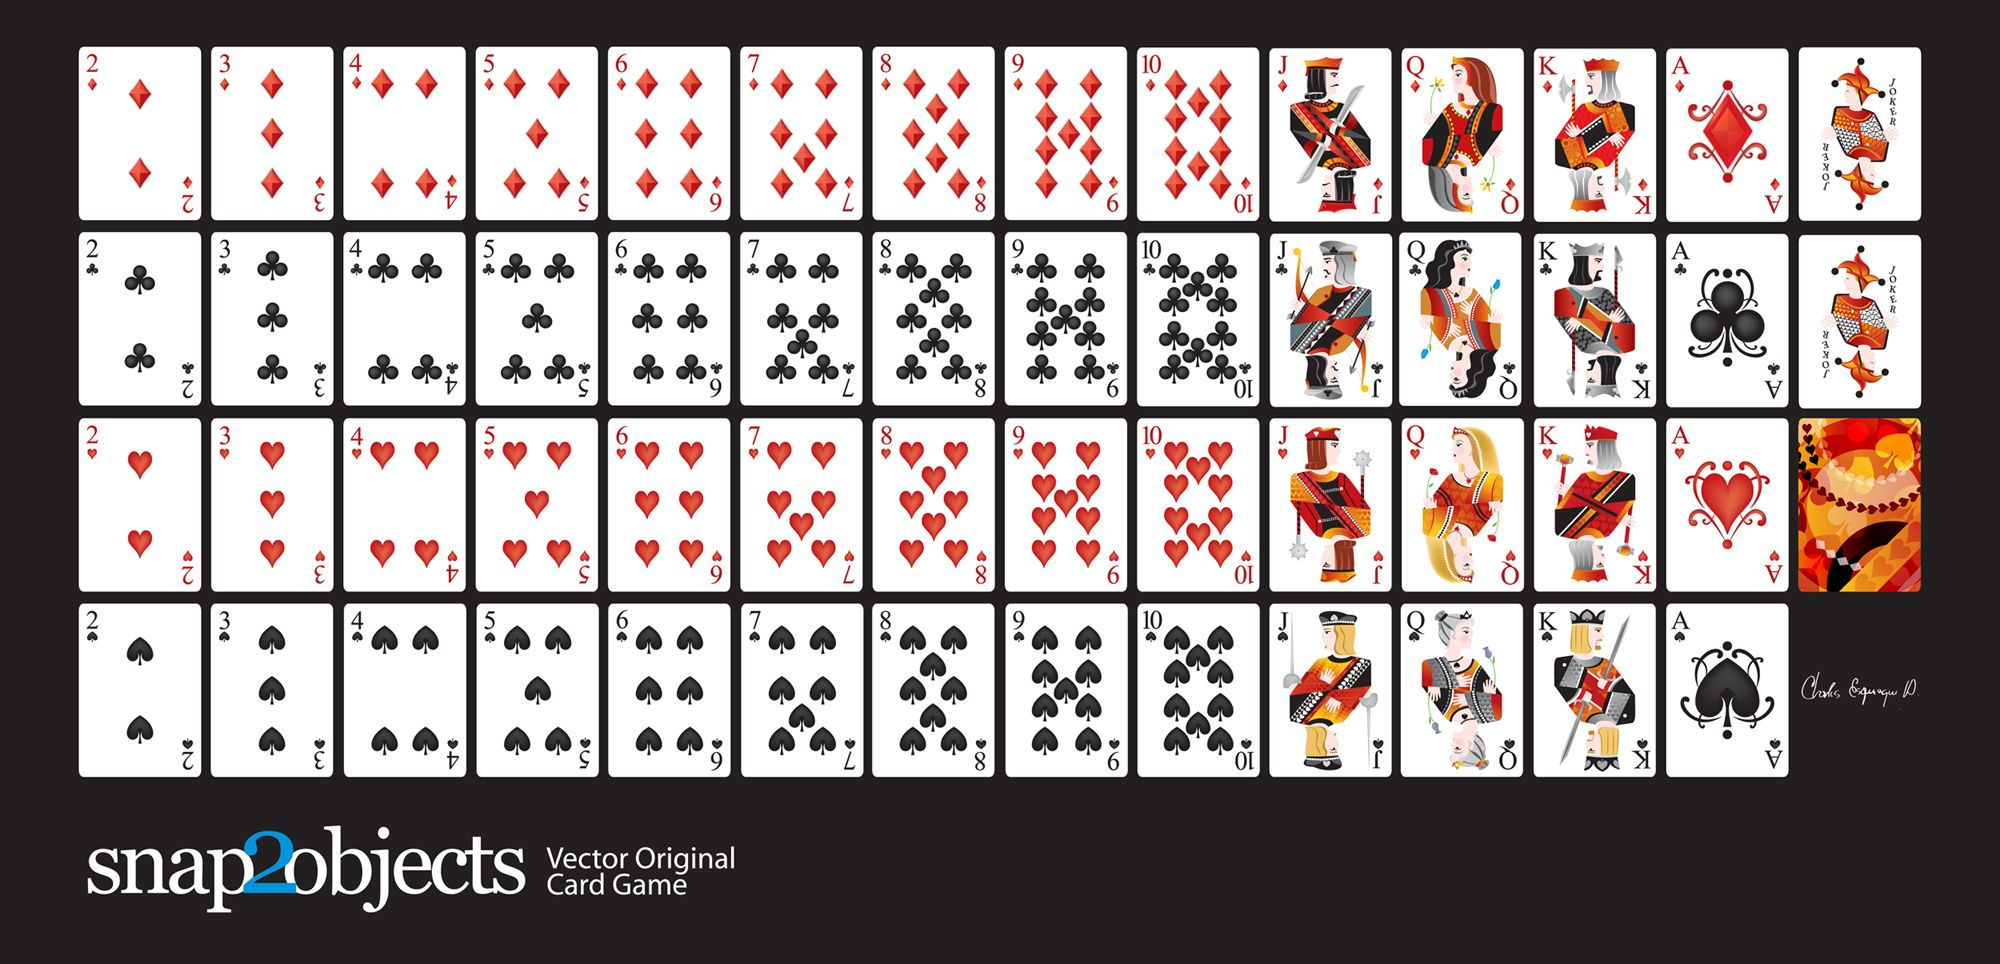 Free-Vector-Card-Deck | Silhouette Cameo | Pinterest | Printable - Free Printable Deck Of Cards